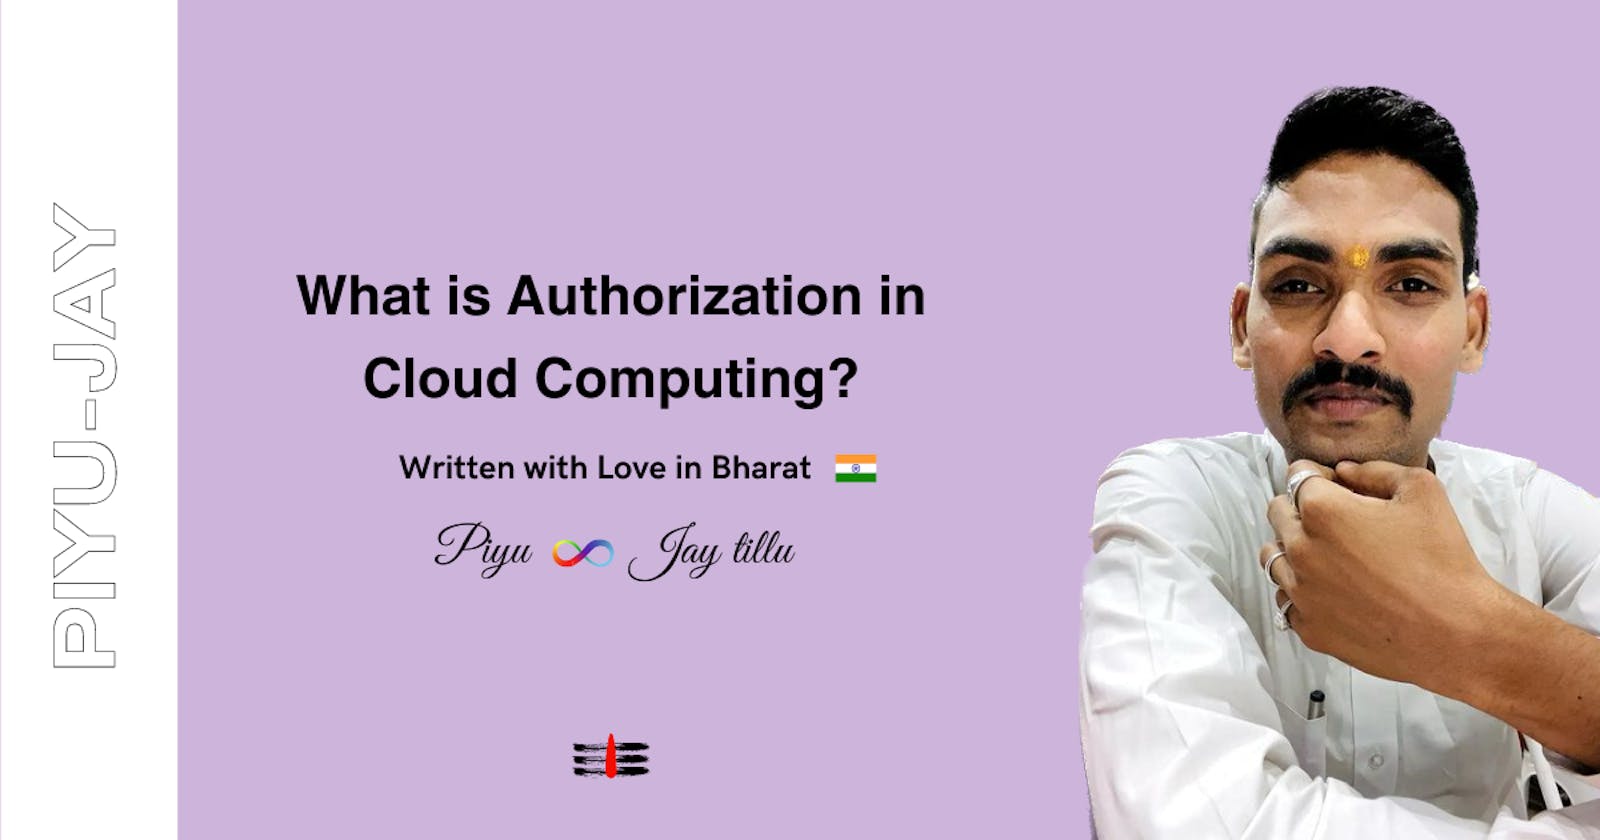 What is Authorization in Cloud Computing?